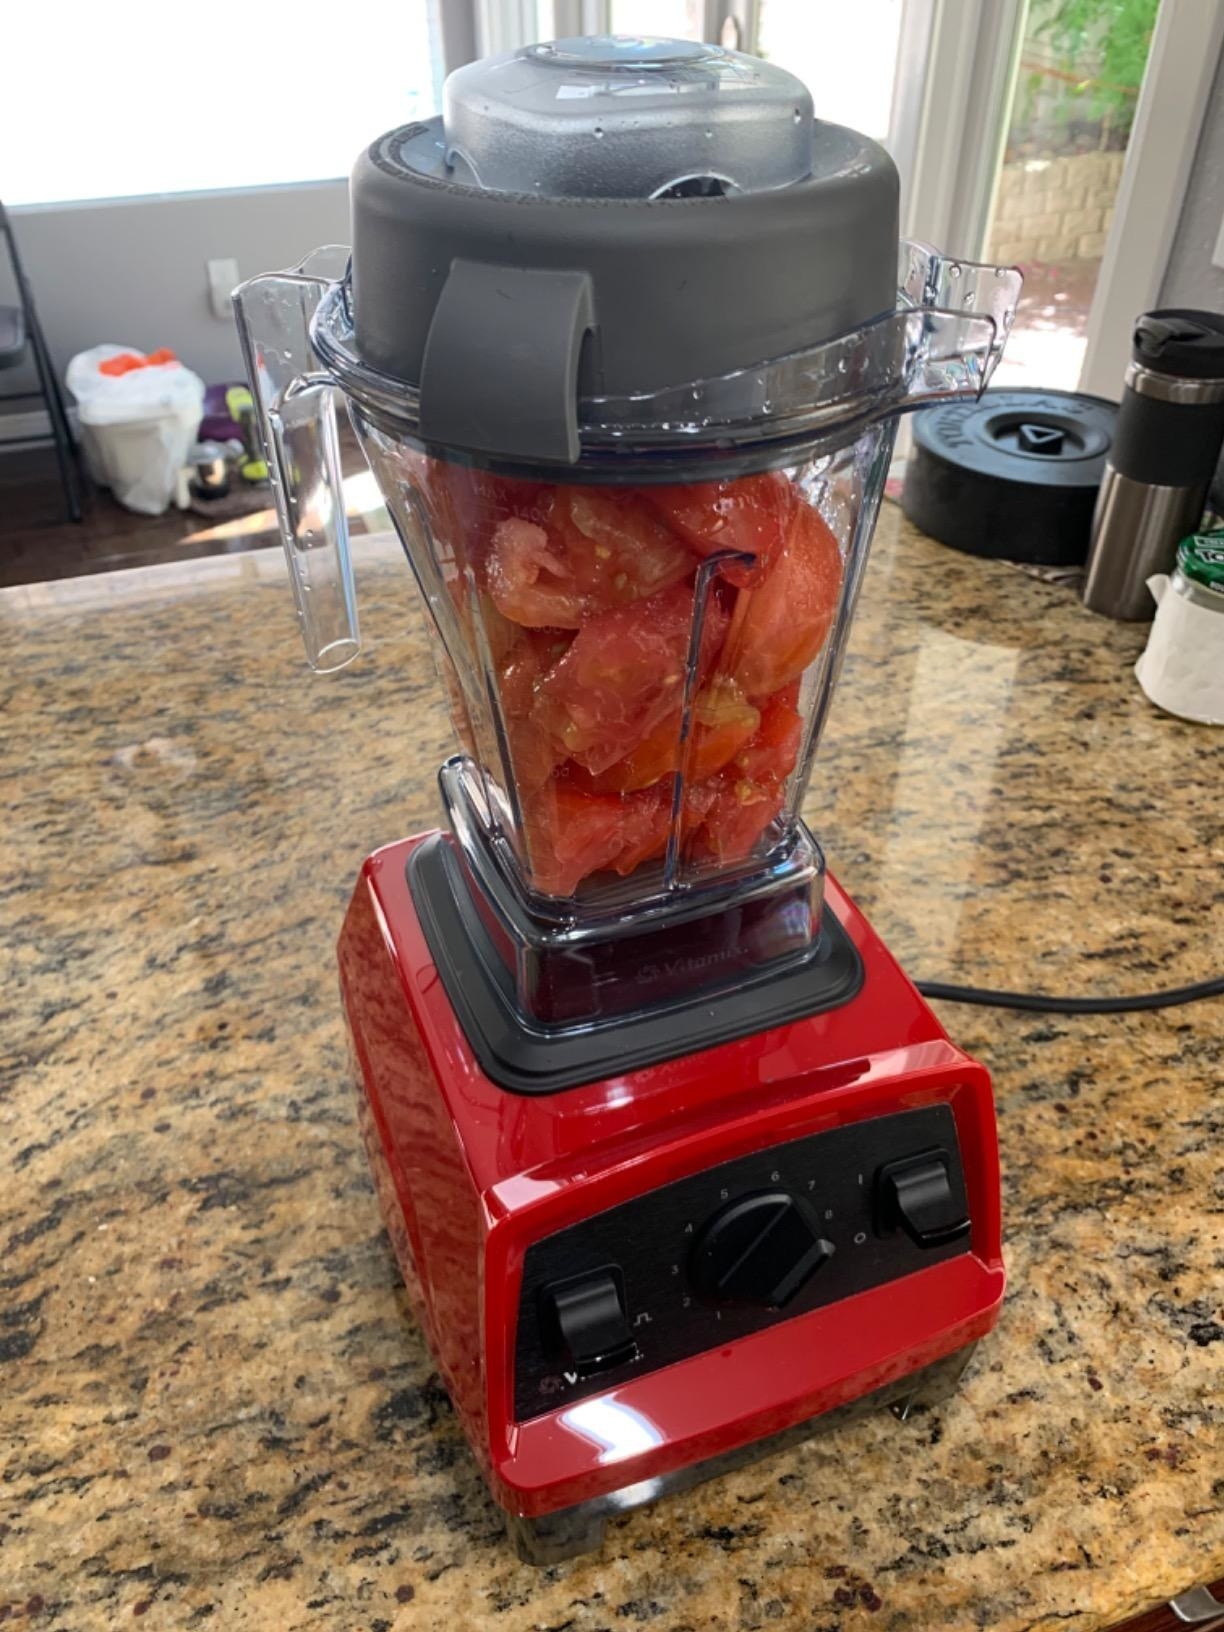 The blender in red filled with tomatoes